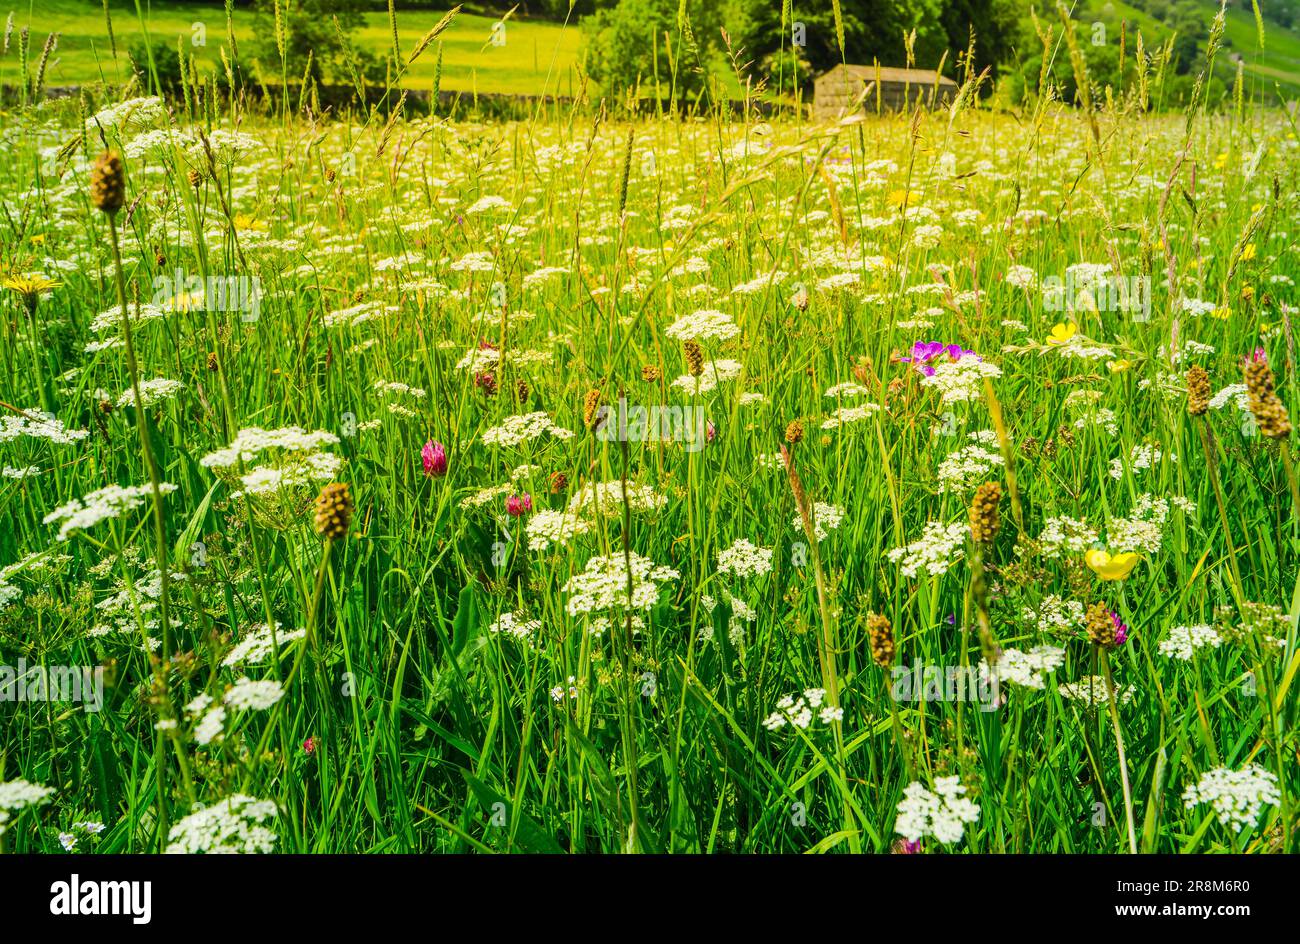 Summer time and the wild flower meadows in Swaledale are full of flowers of different colours. Stock Photo